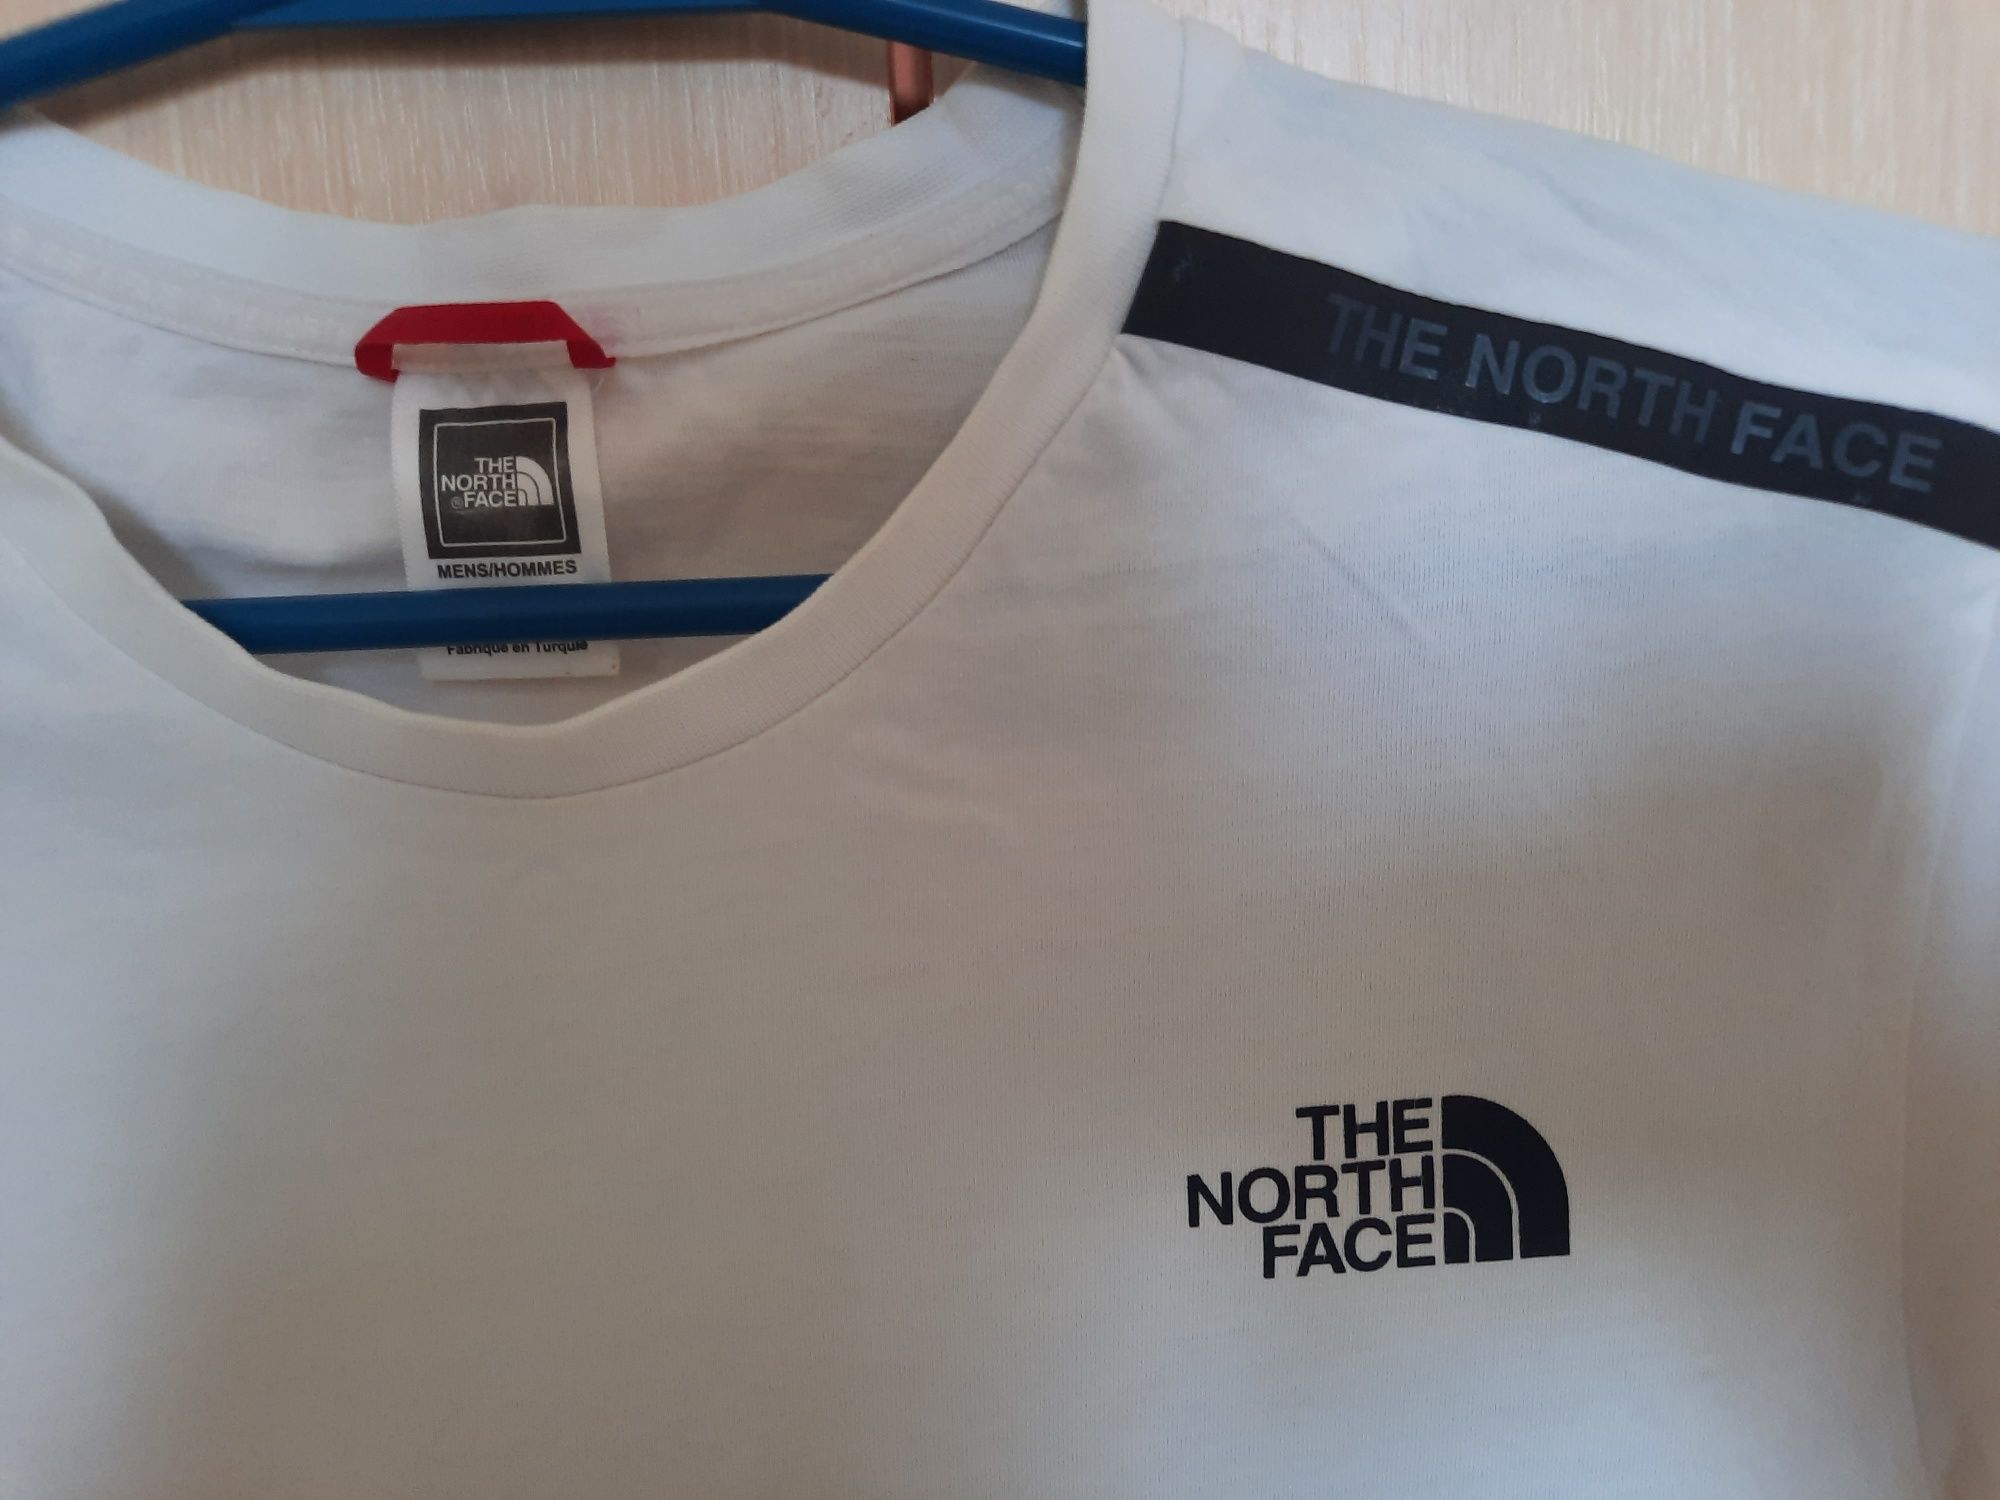 The north face                           .